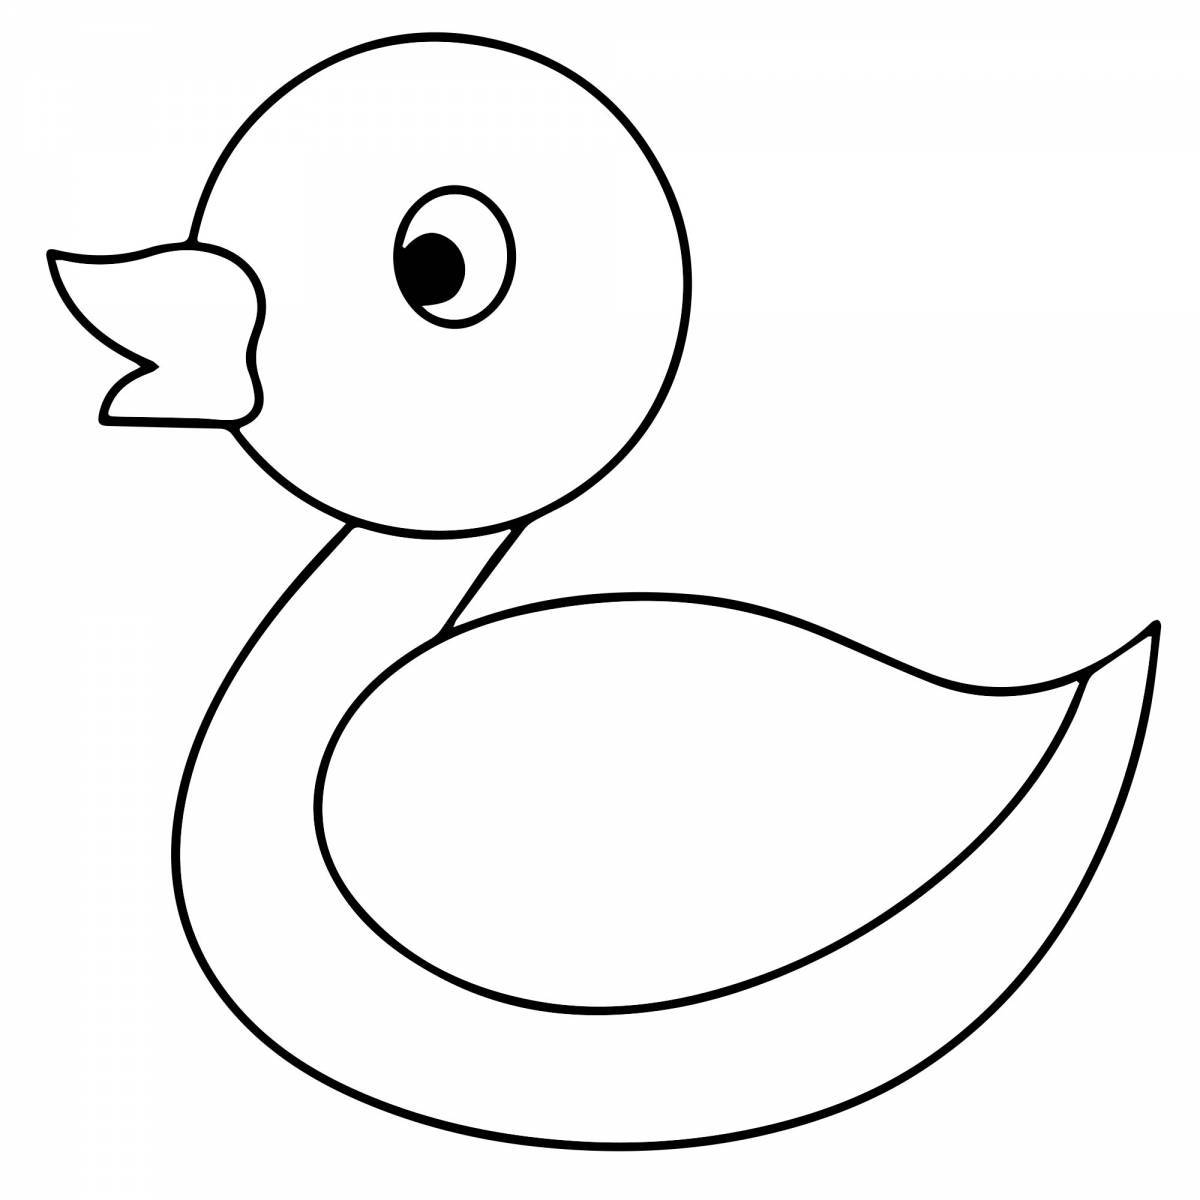 Glowing duckling coloring page for kids